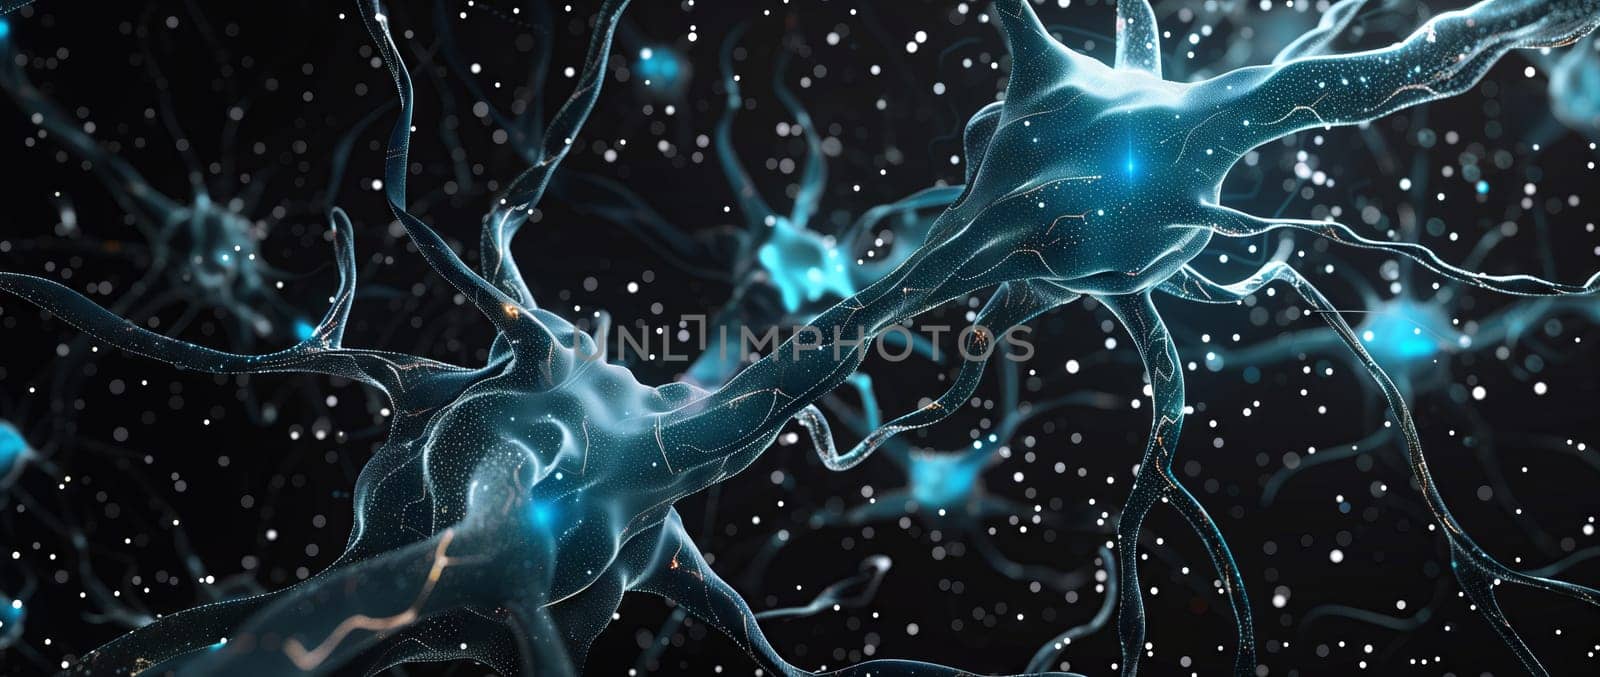 A digital representation of neurons in a brain, glowing in electric blue against a dark backdrop. Each neuron resembles a fictional character in a waterlike space, creating an artistic pattern